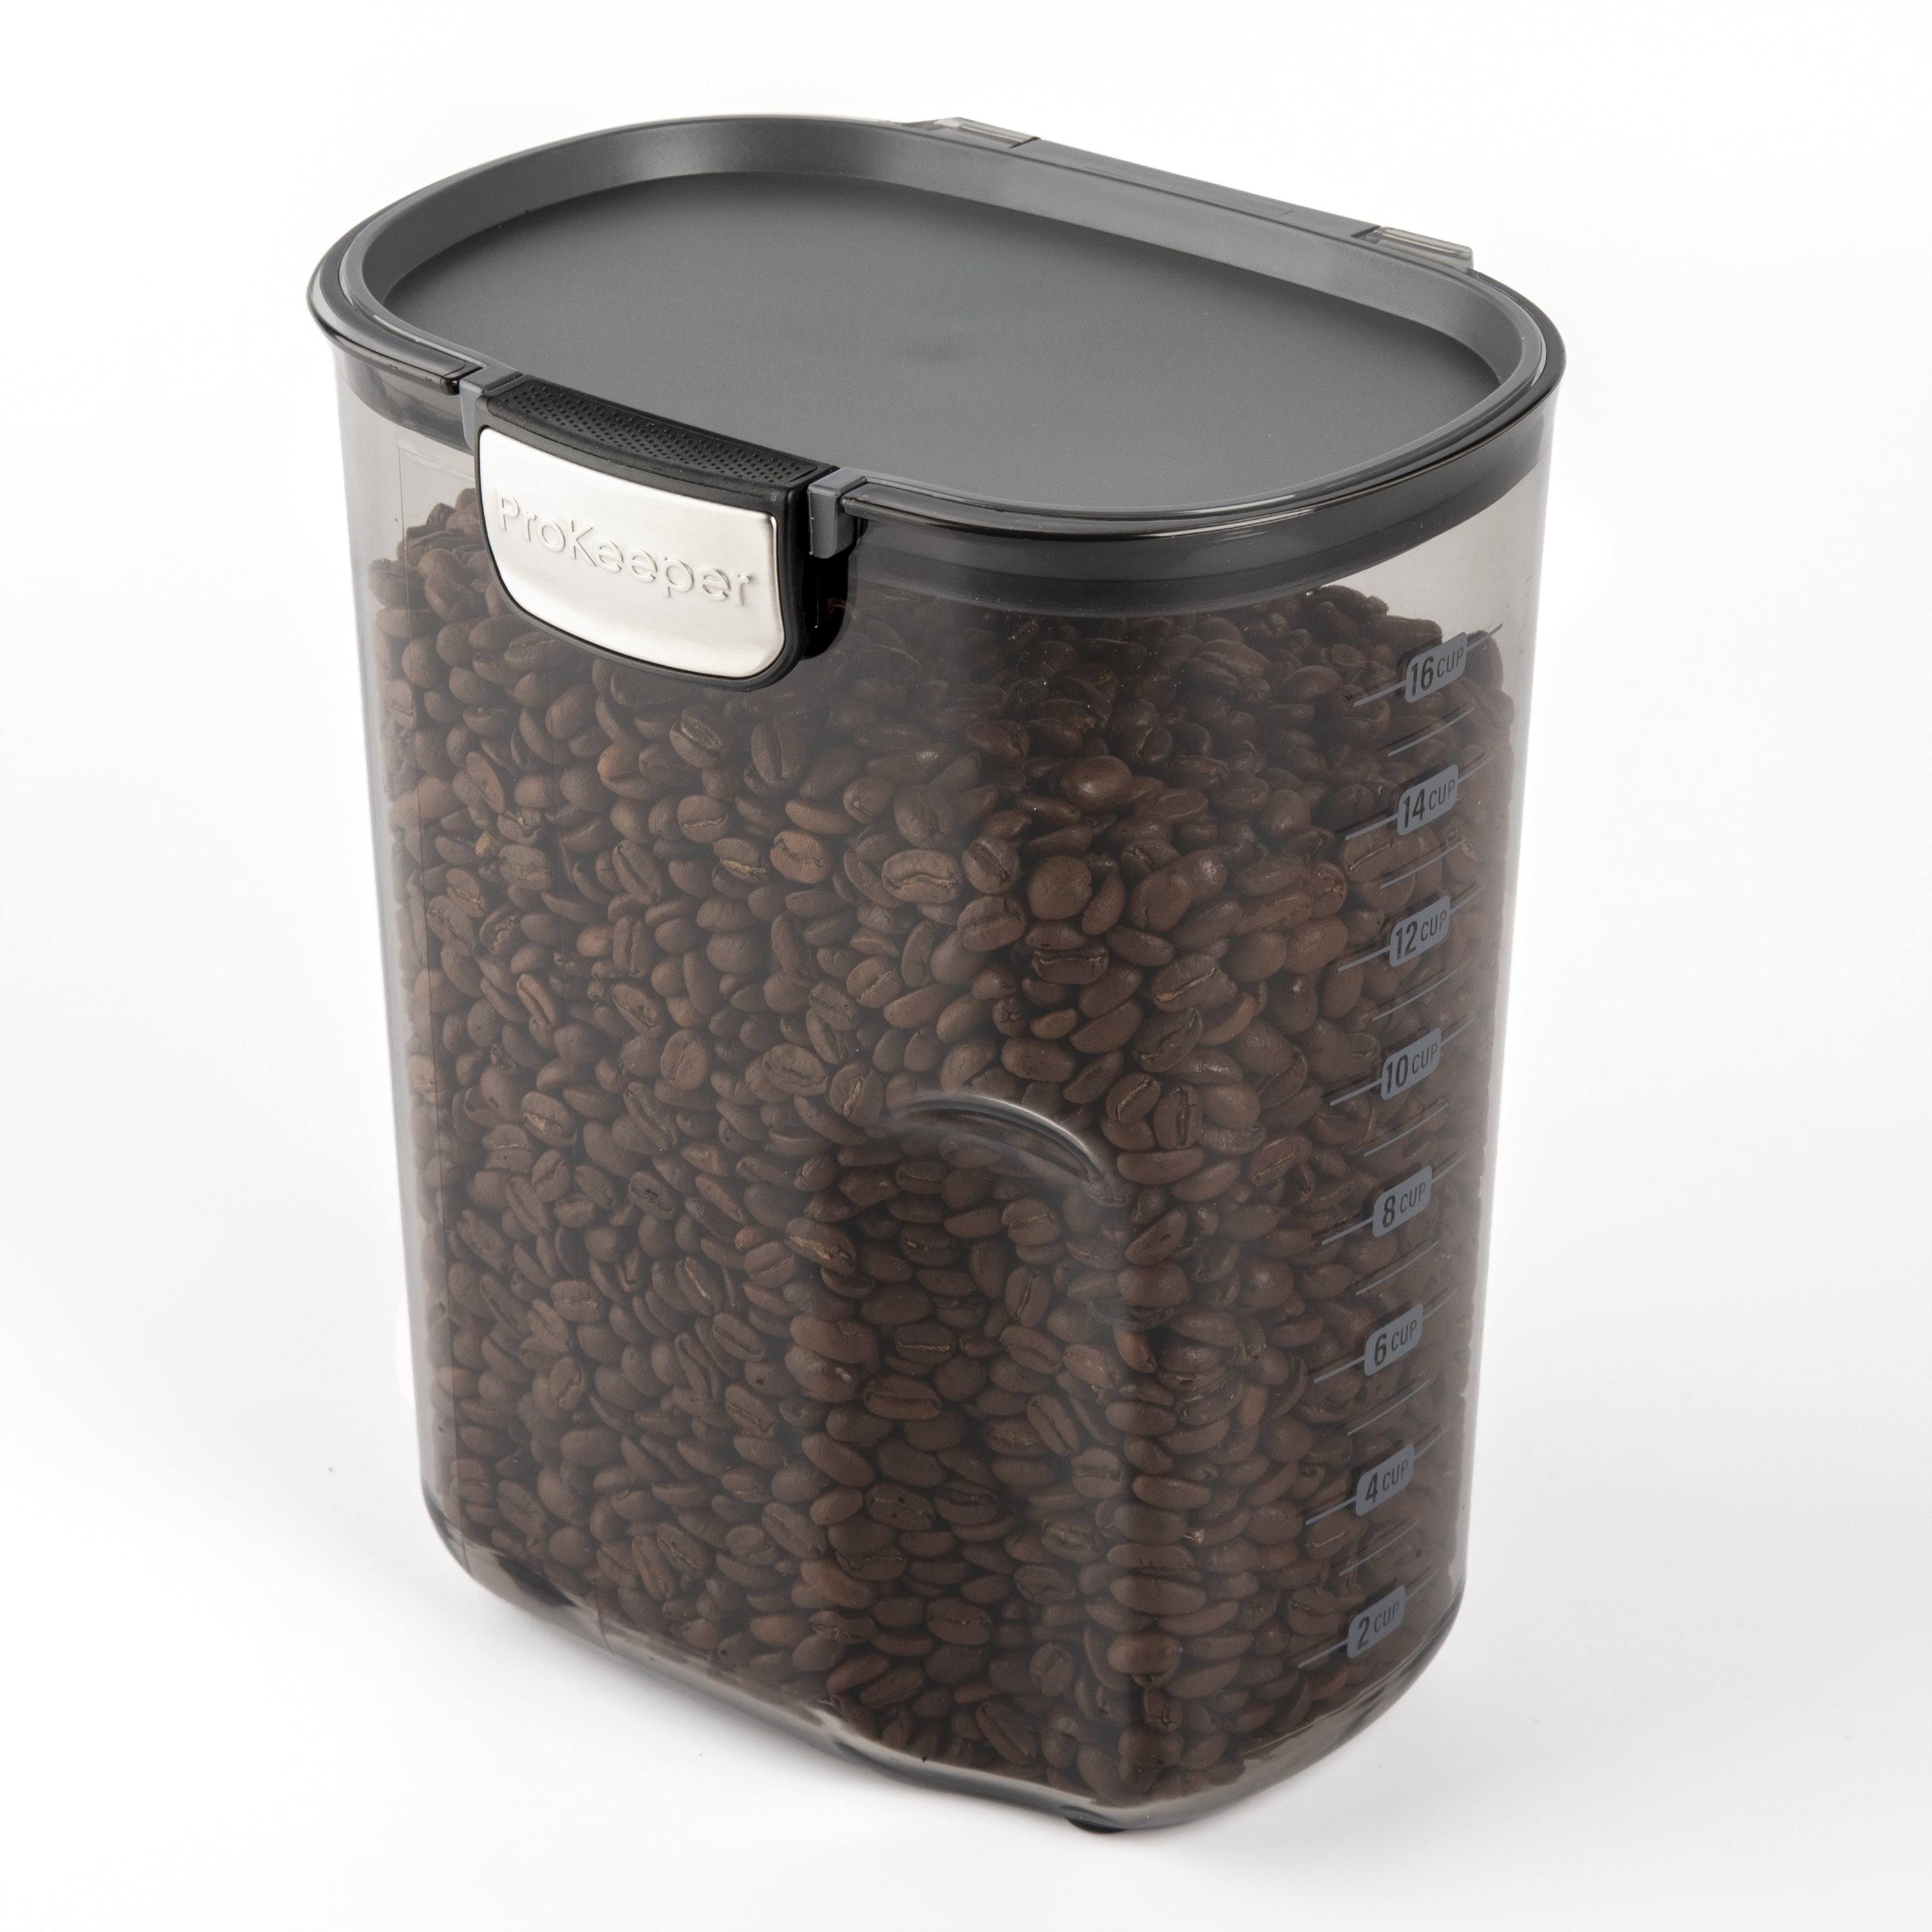 ProKeeper Airtight Coffee Canister - 4 Quarts | Image